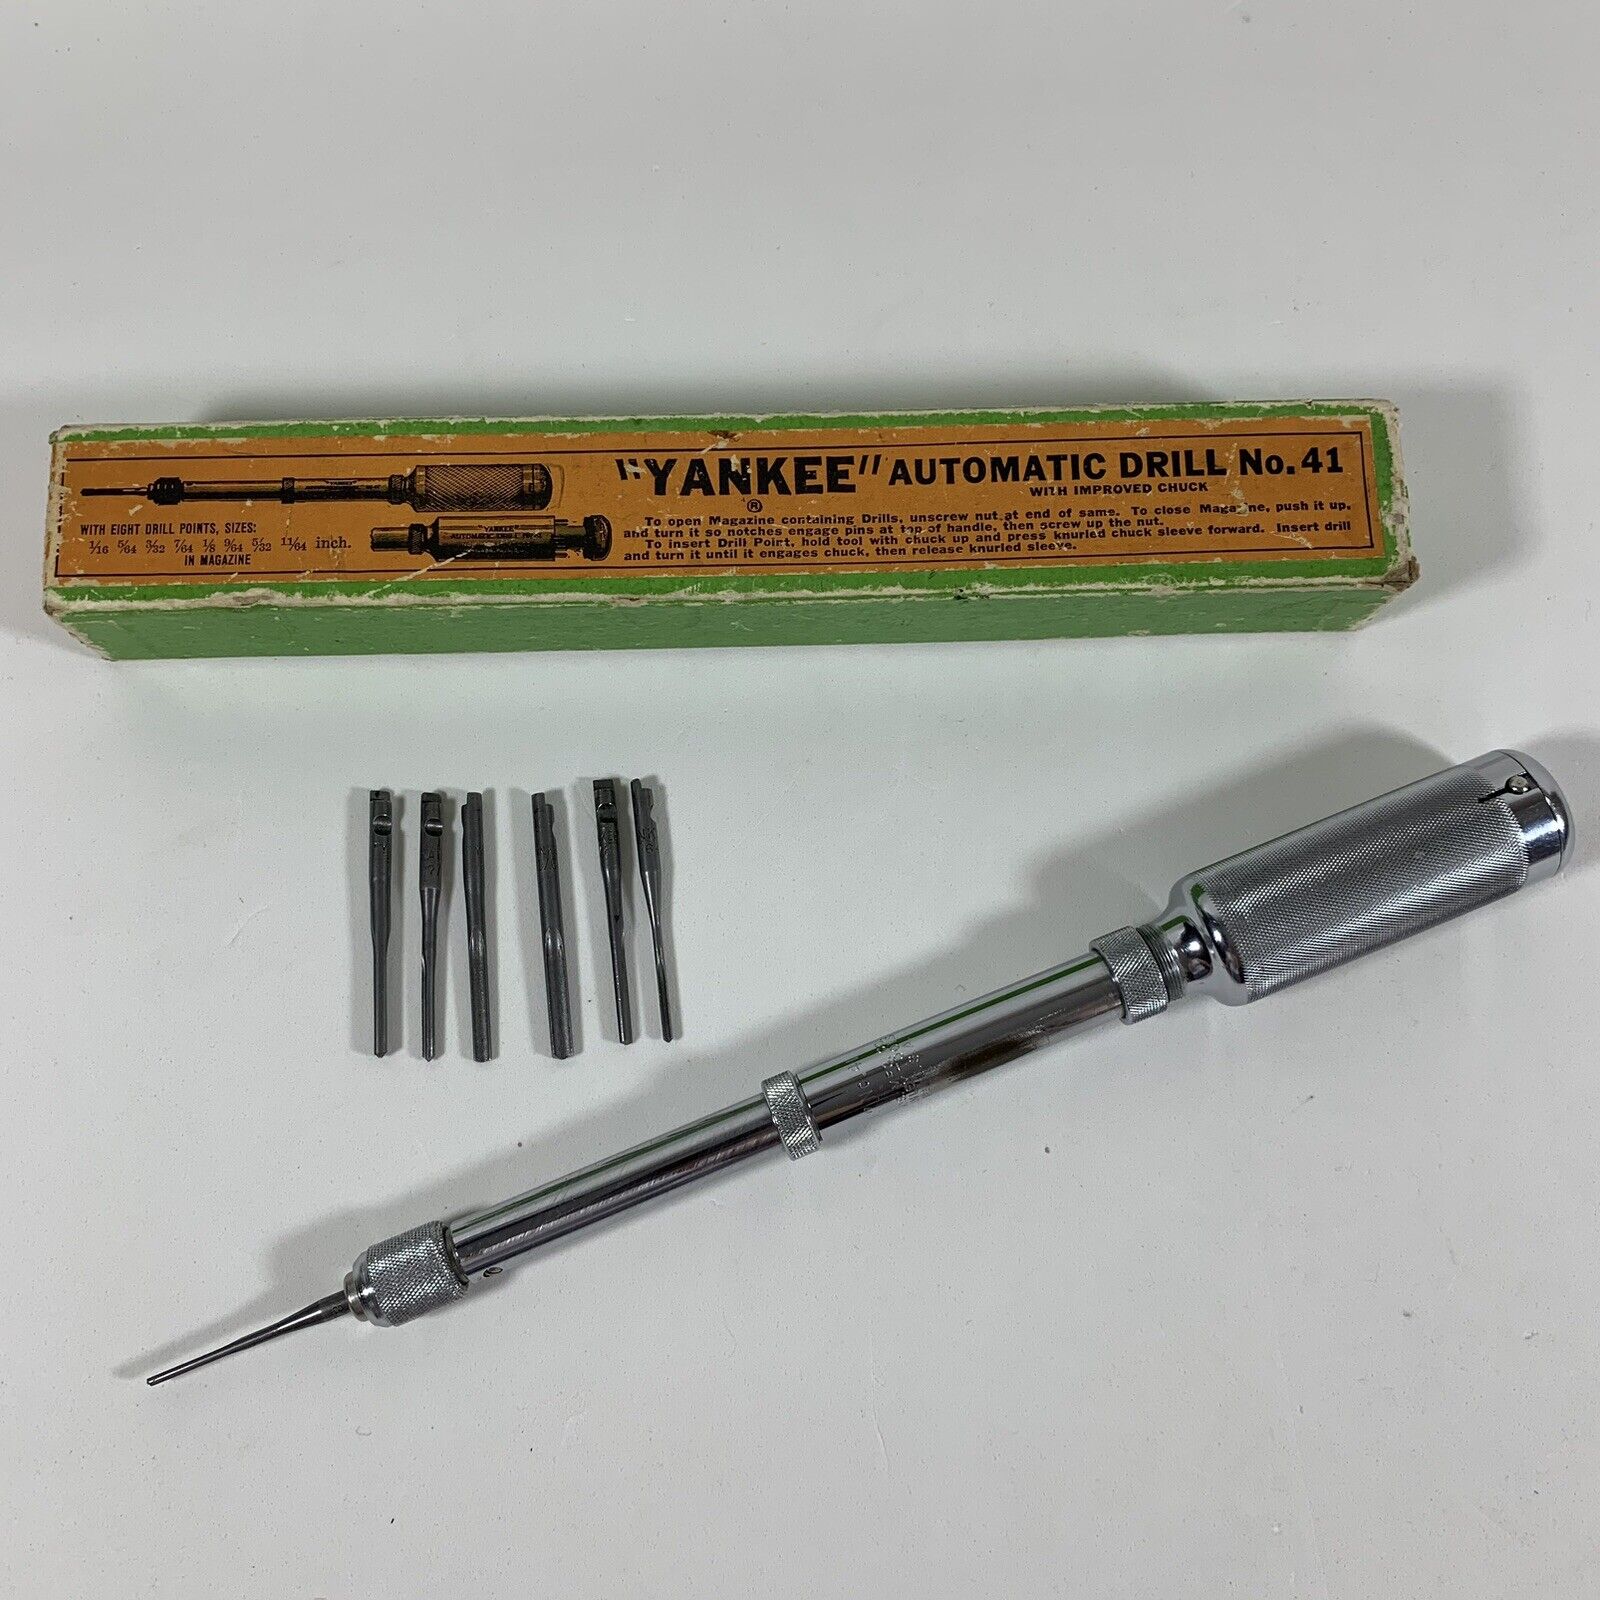 Vintage Stanley Yankee No. 41 Push Drill with 7 Bits, North Bros. USA